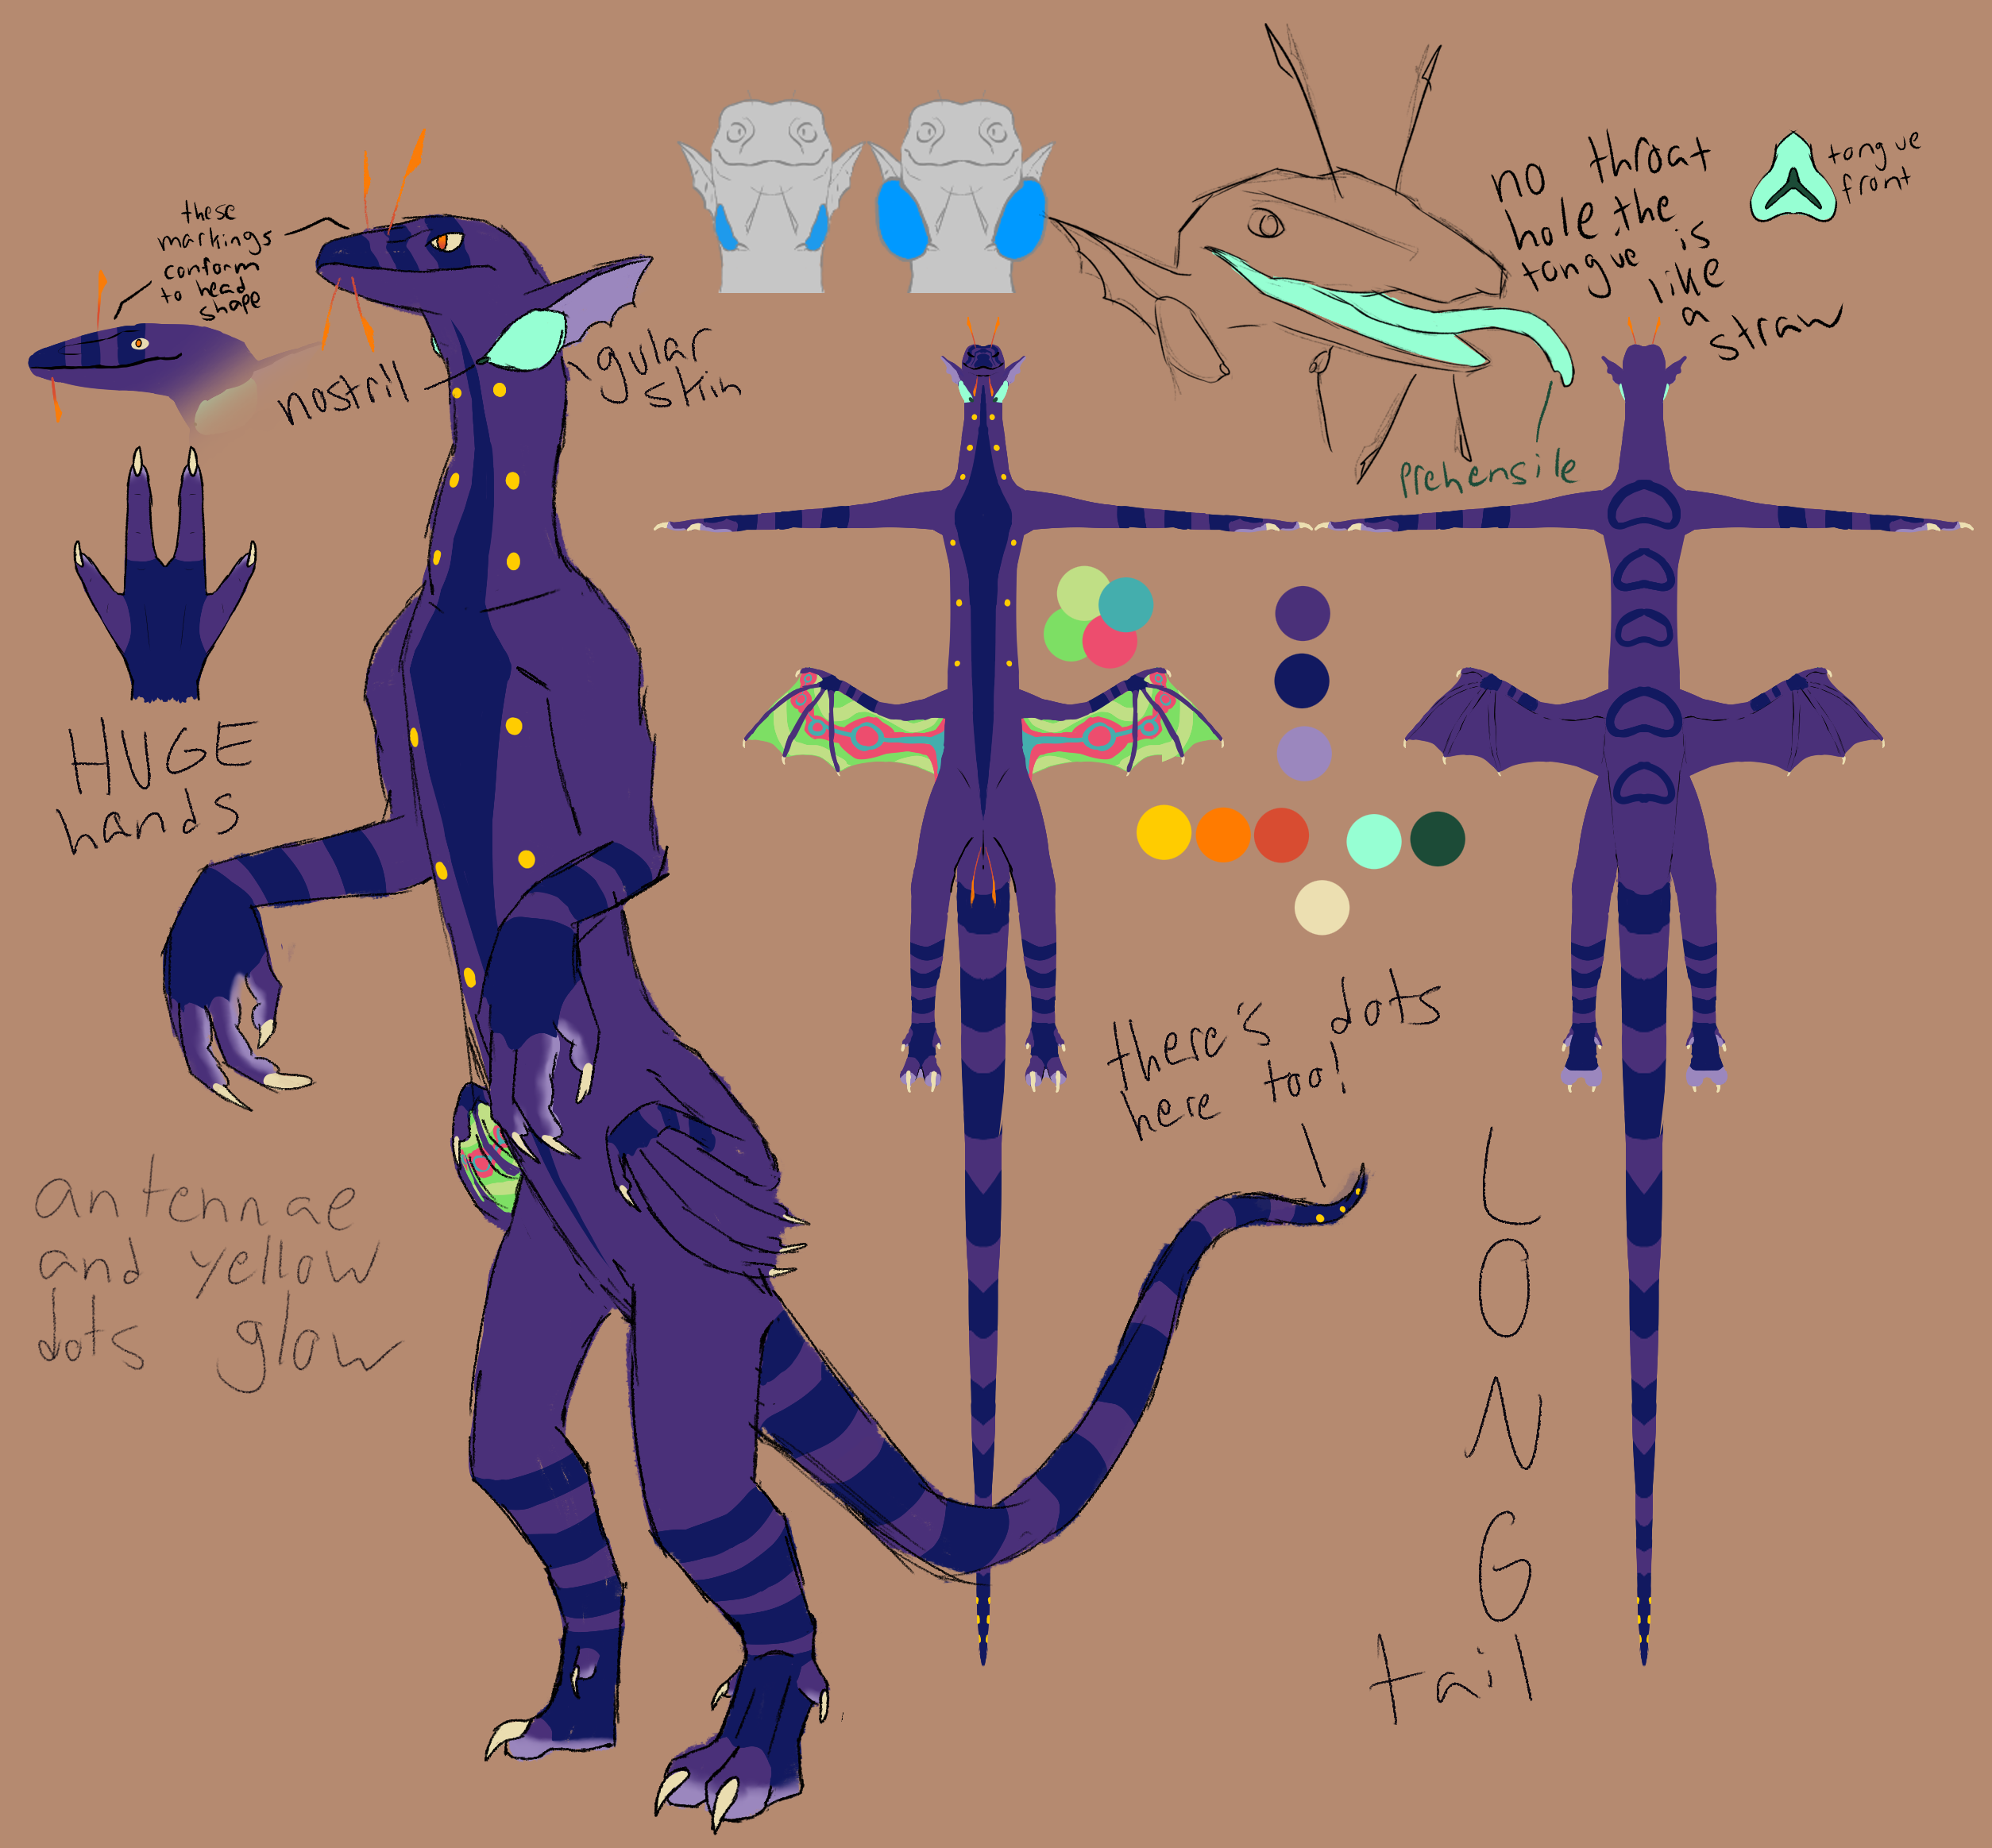 Aroo is a purple snake-like alien with dark blue-purple ring markings. They have orange antennae, yellow dots along their body, green sacks on their neck, and a long tail.